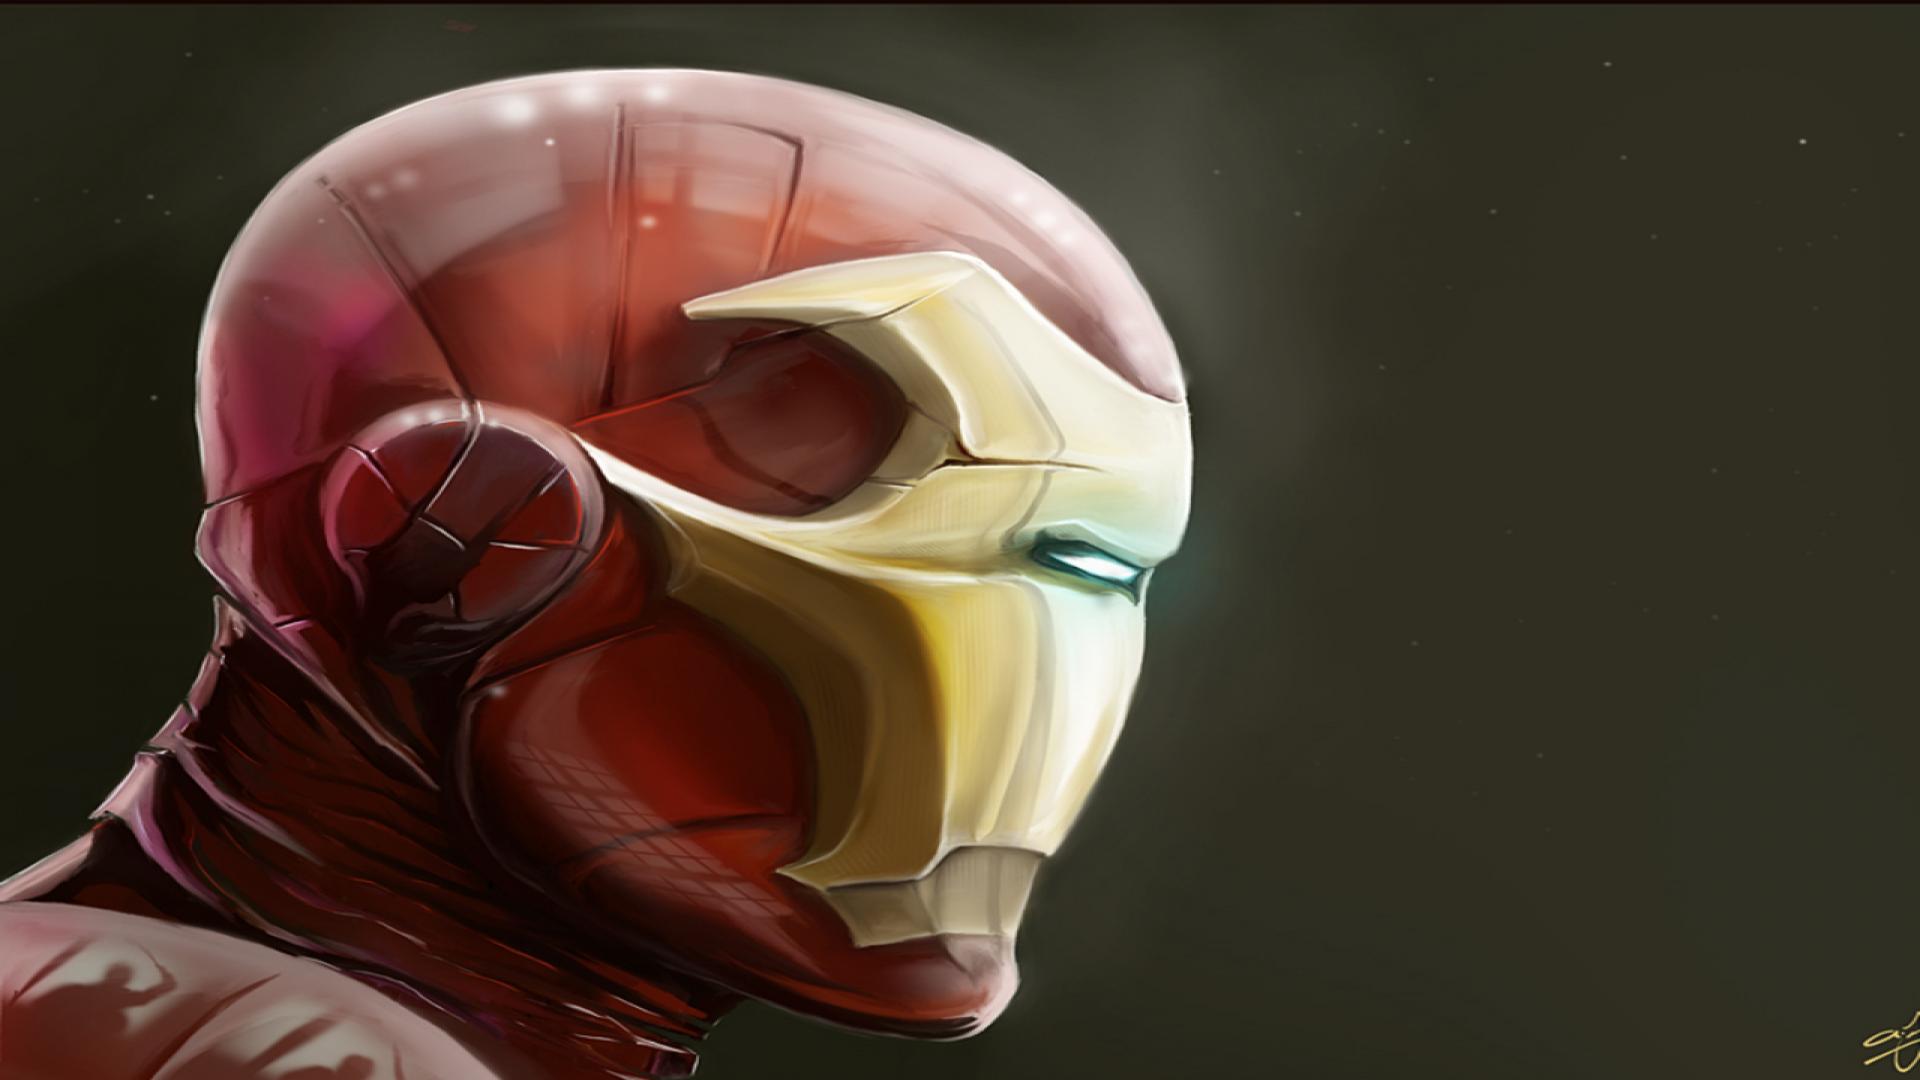 Iron Man soaring through the skies in a vibrant comic-style illustration.